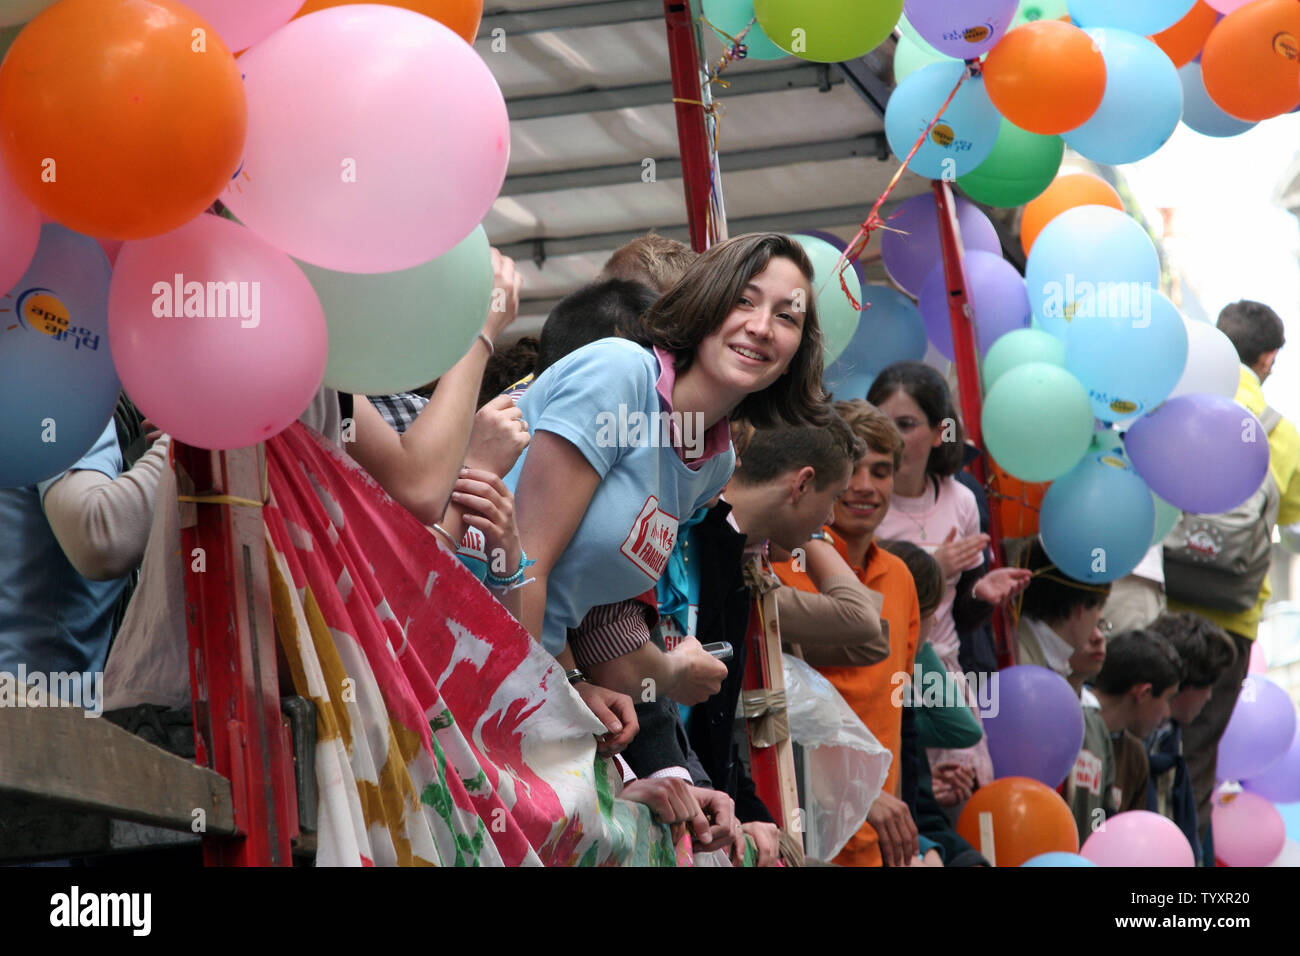 About 2,000 youths participate in the second annual Life Parade through Paris May 20, 2006, organized by conservative Catholic anti-abortion pro-family associations.   (UPI Photo/William Alix) Stock Photo